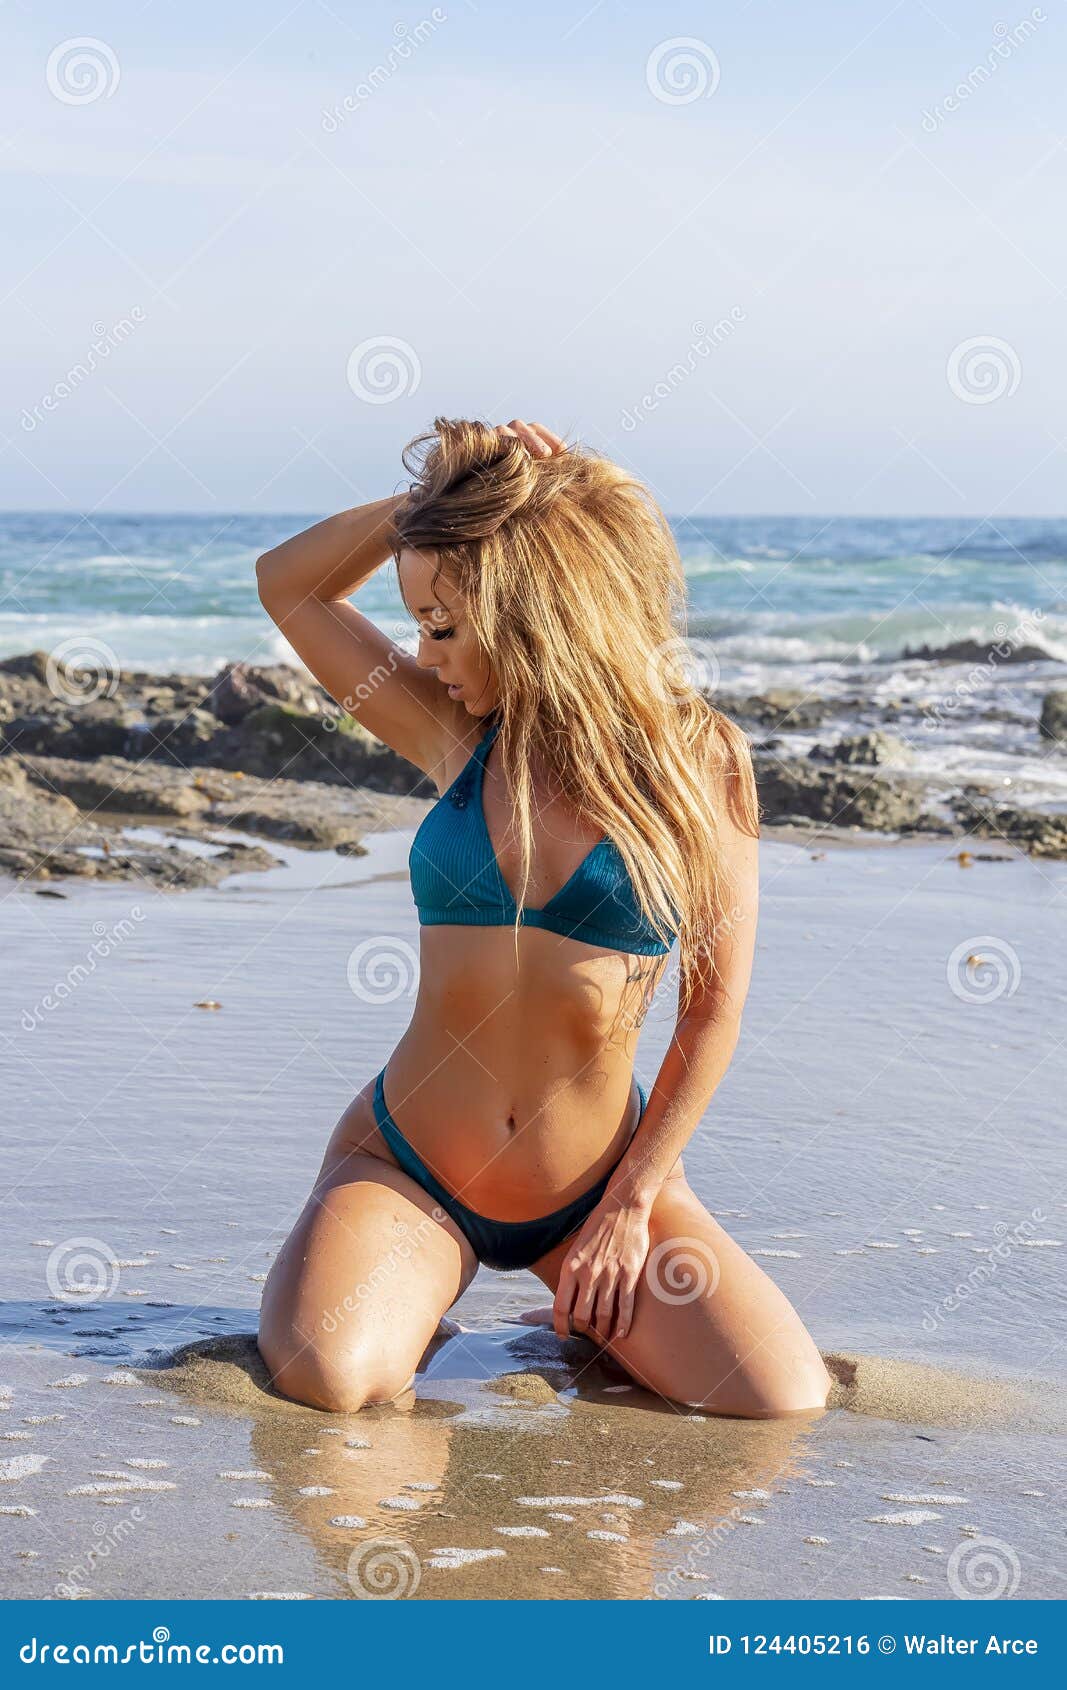 Beach Model Pictures